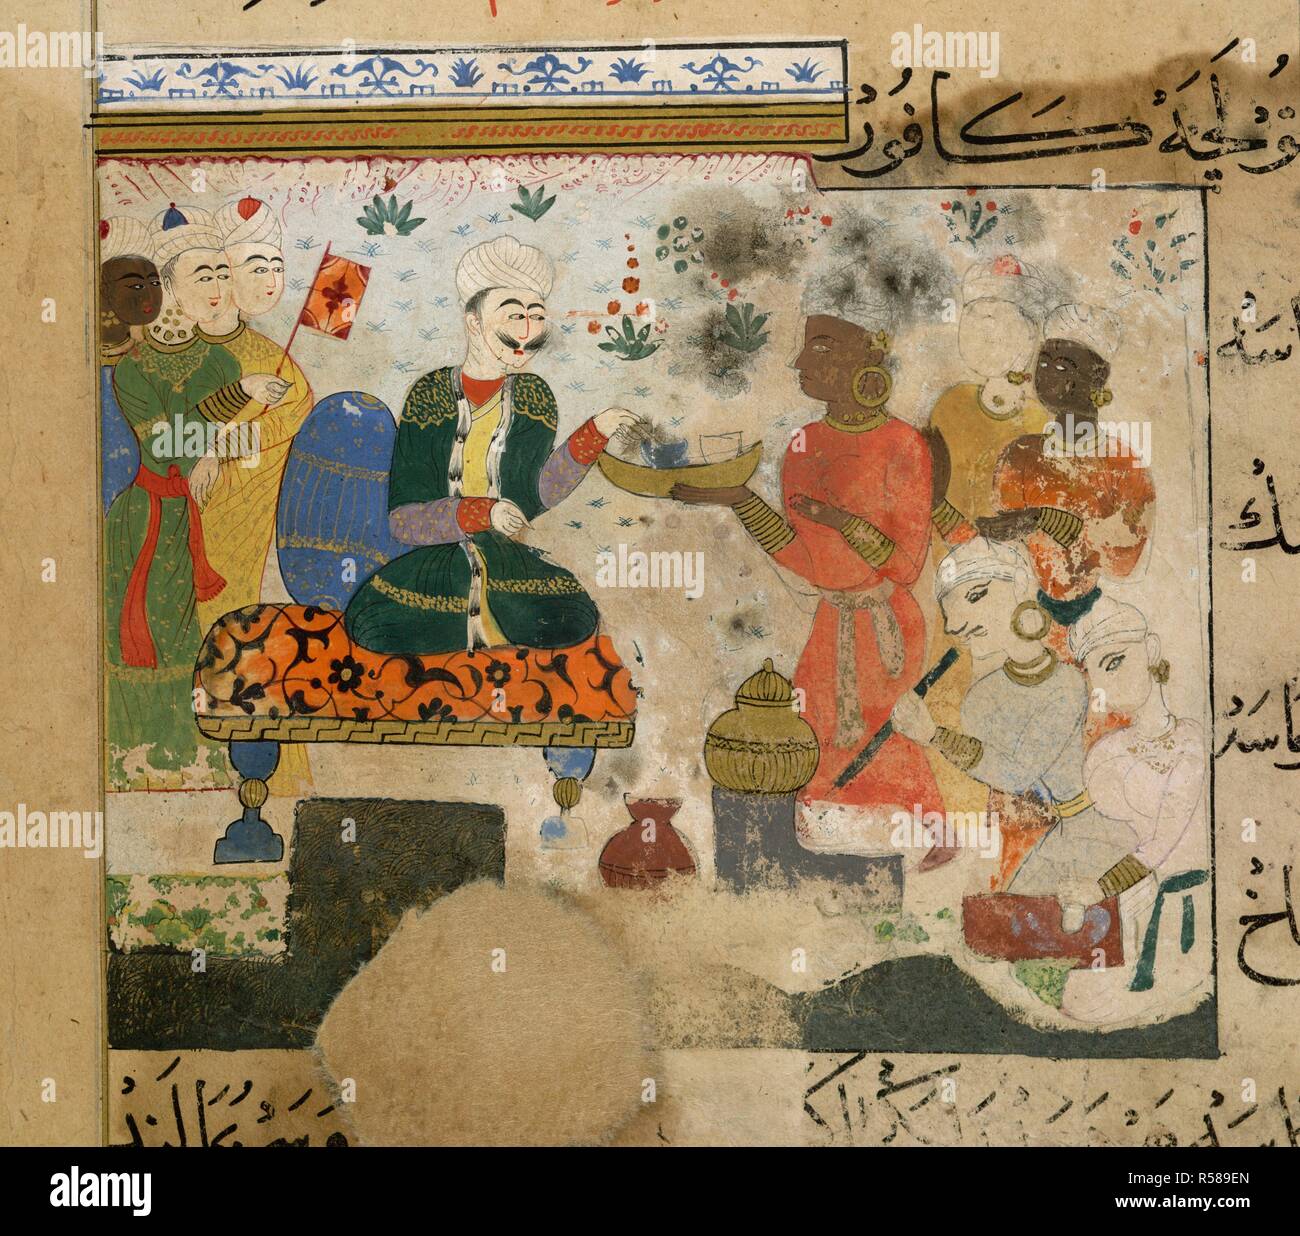 Preparation of perfume. The Ni'matnama-i Nasir al-Din Shah. A manuscript o. 1495 - 1505. Preparation of perfume for the Sultan Ghiyath al-Din. Opaque watercolour. Sultanate style.  Image taken from The Ni'matnama-i Nasir al-Din Shah. A manuscript on Indian cookery and the preparation of sweetmeats, spices etc.  Originally published/produced in 1495 - 1505. . Source: I.O. ISLAMIC 149, f.168. Language: Persian. Stock Photo